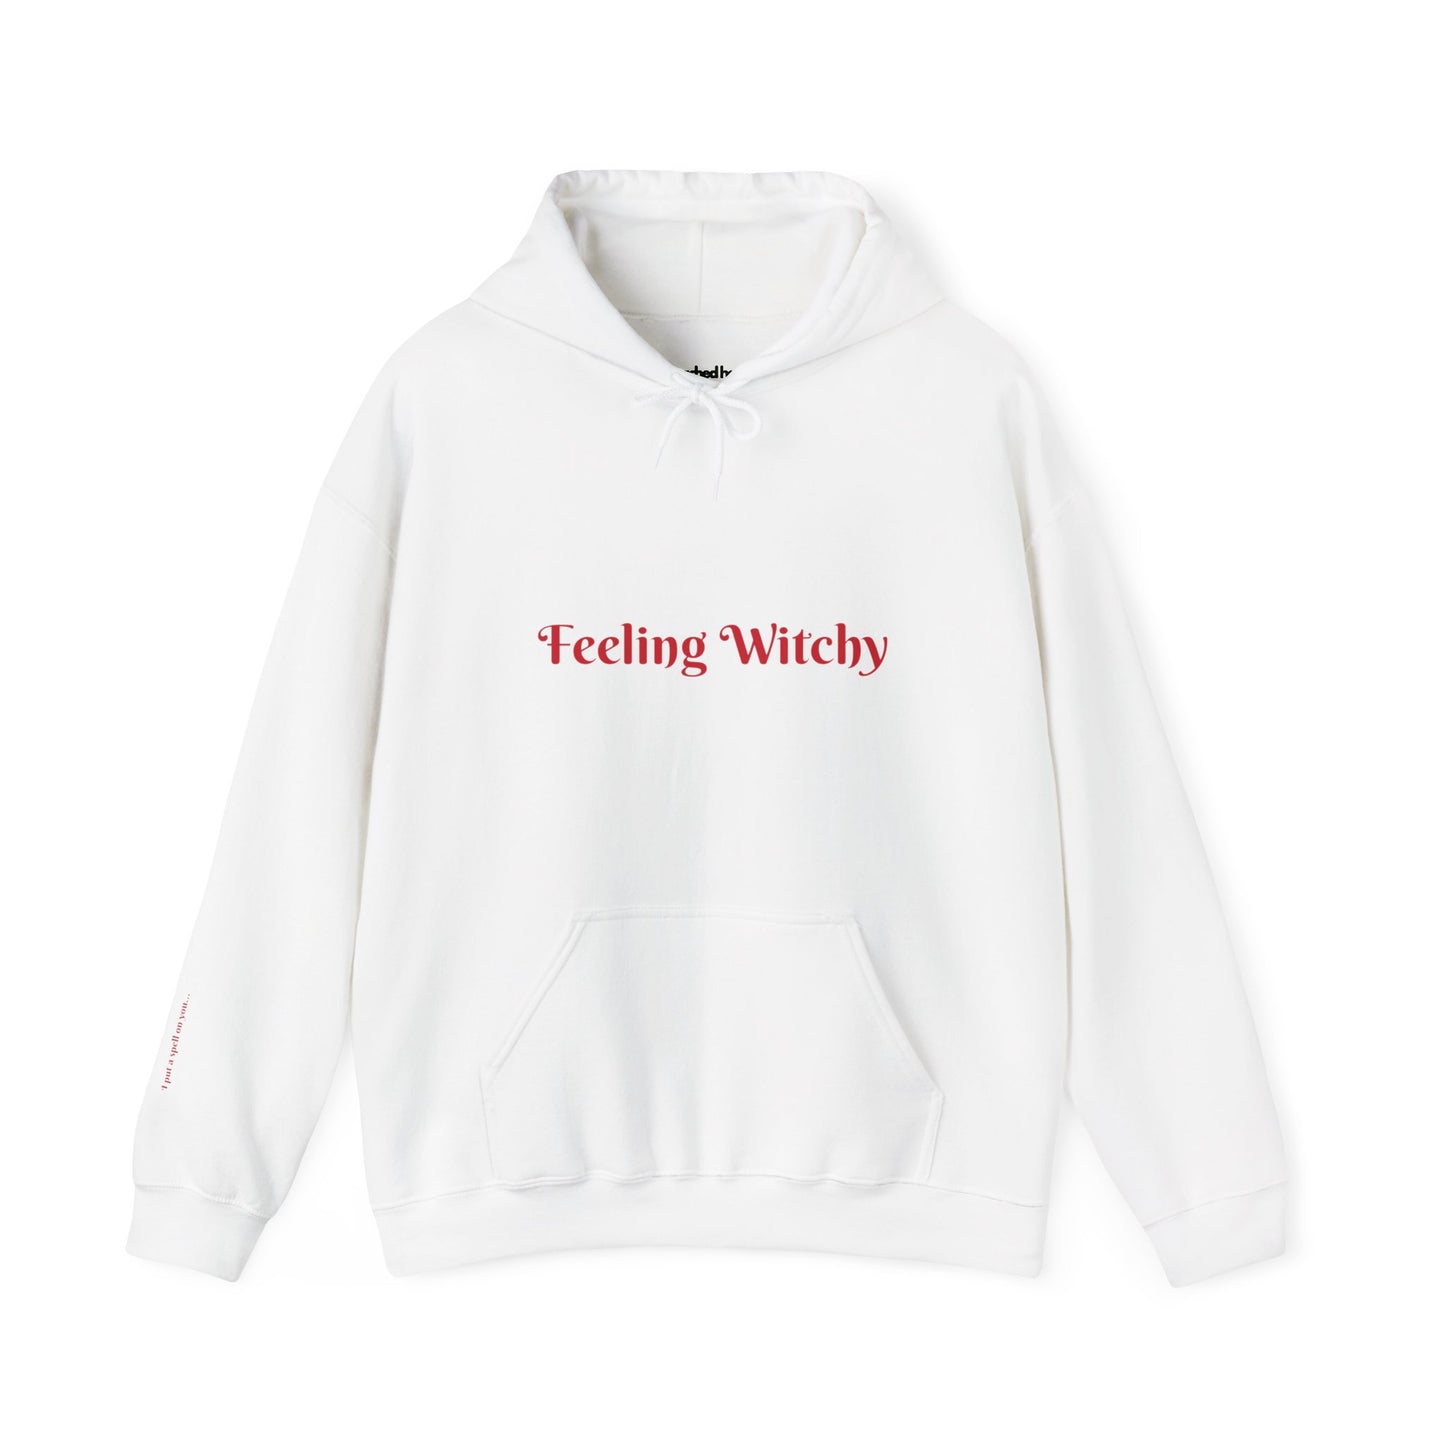 Feeling Witchy - I Put a Spell on You Sleeve - Hoodie (Unisex)